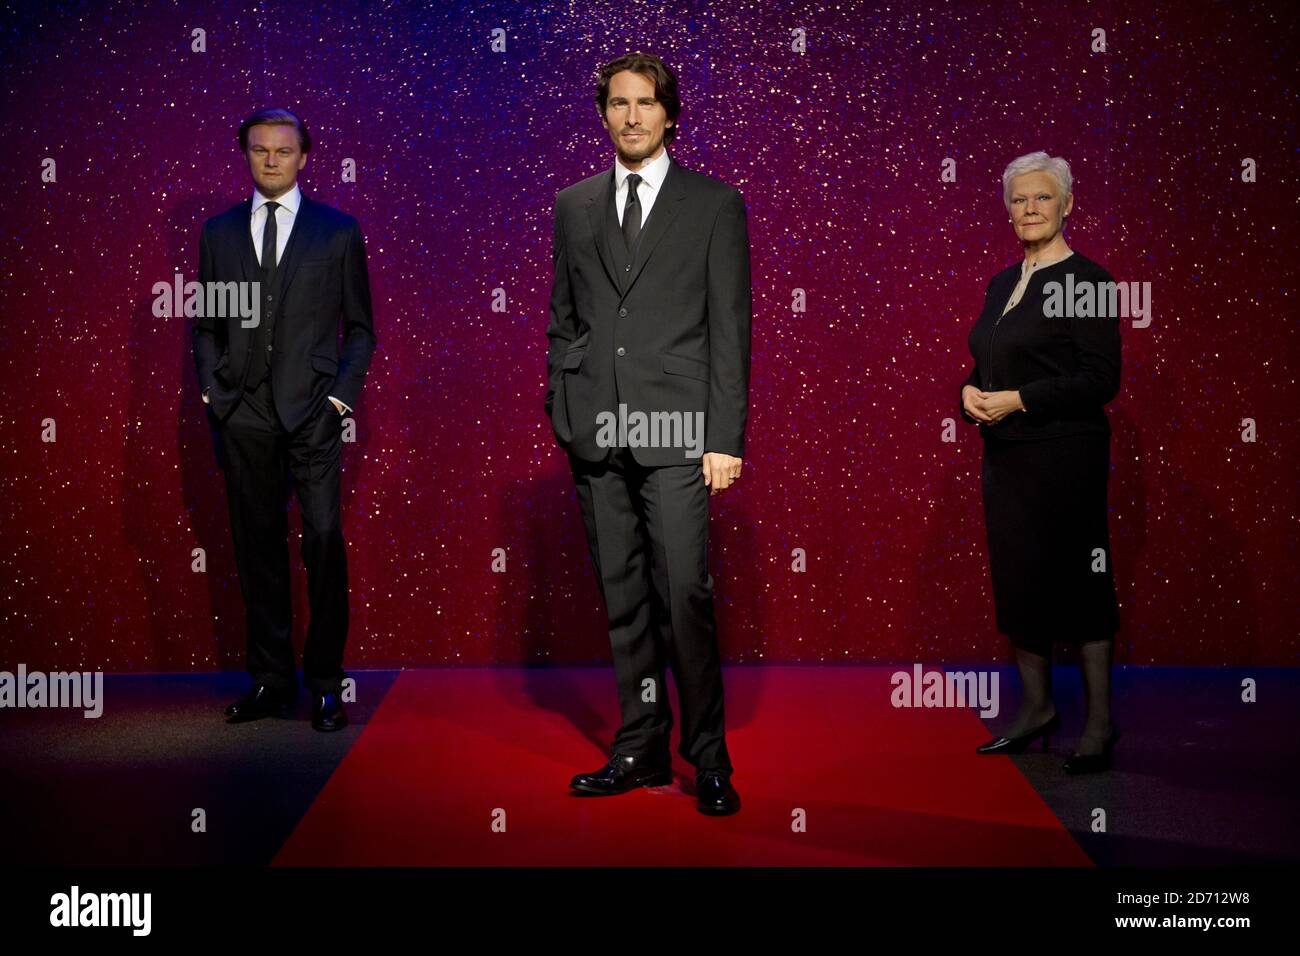 A waxwork of Christian Bale is unveiled with other best actor nominees for the Oscars, at Madame Tussauds museum in central London. Stock Photo